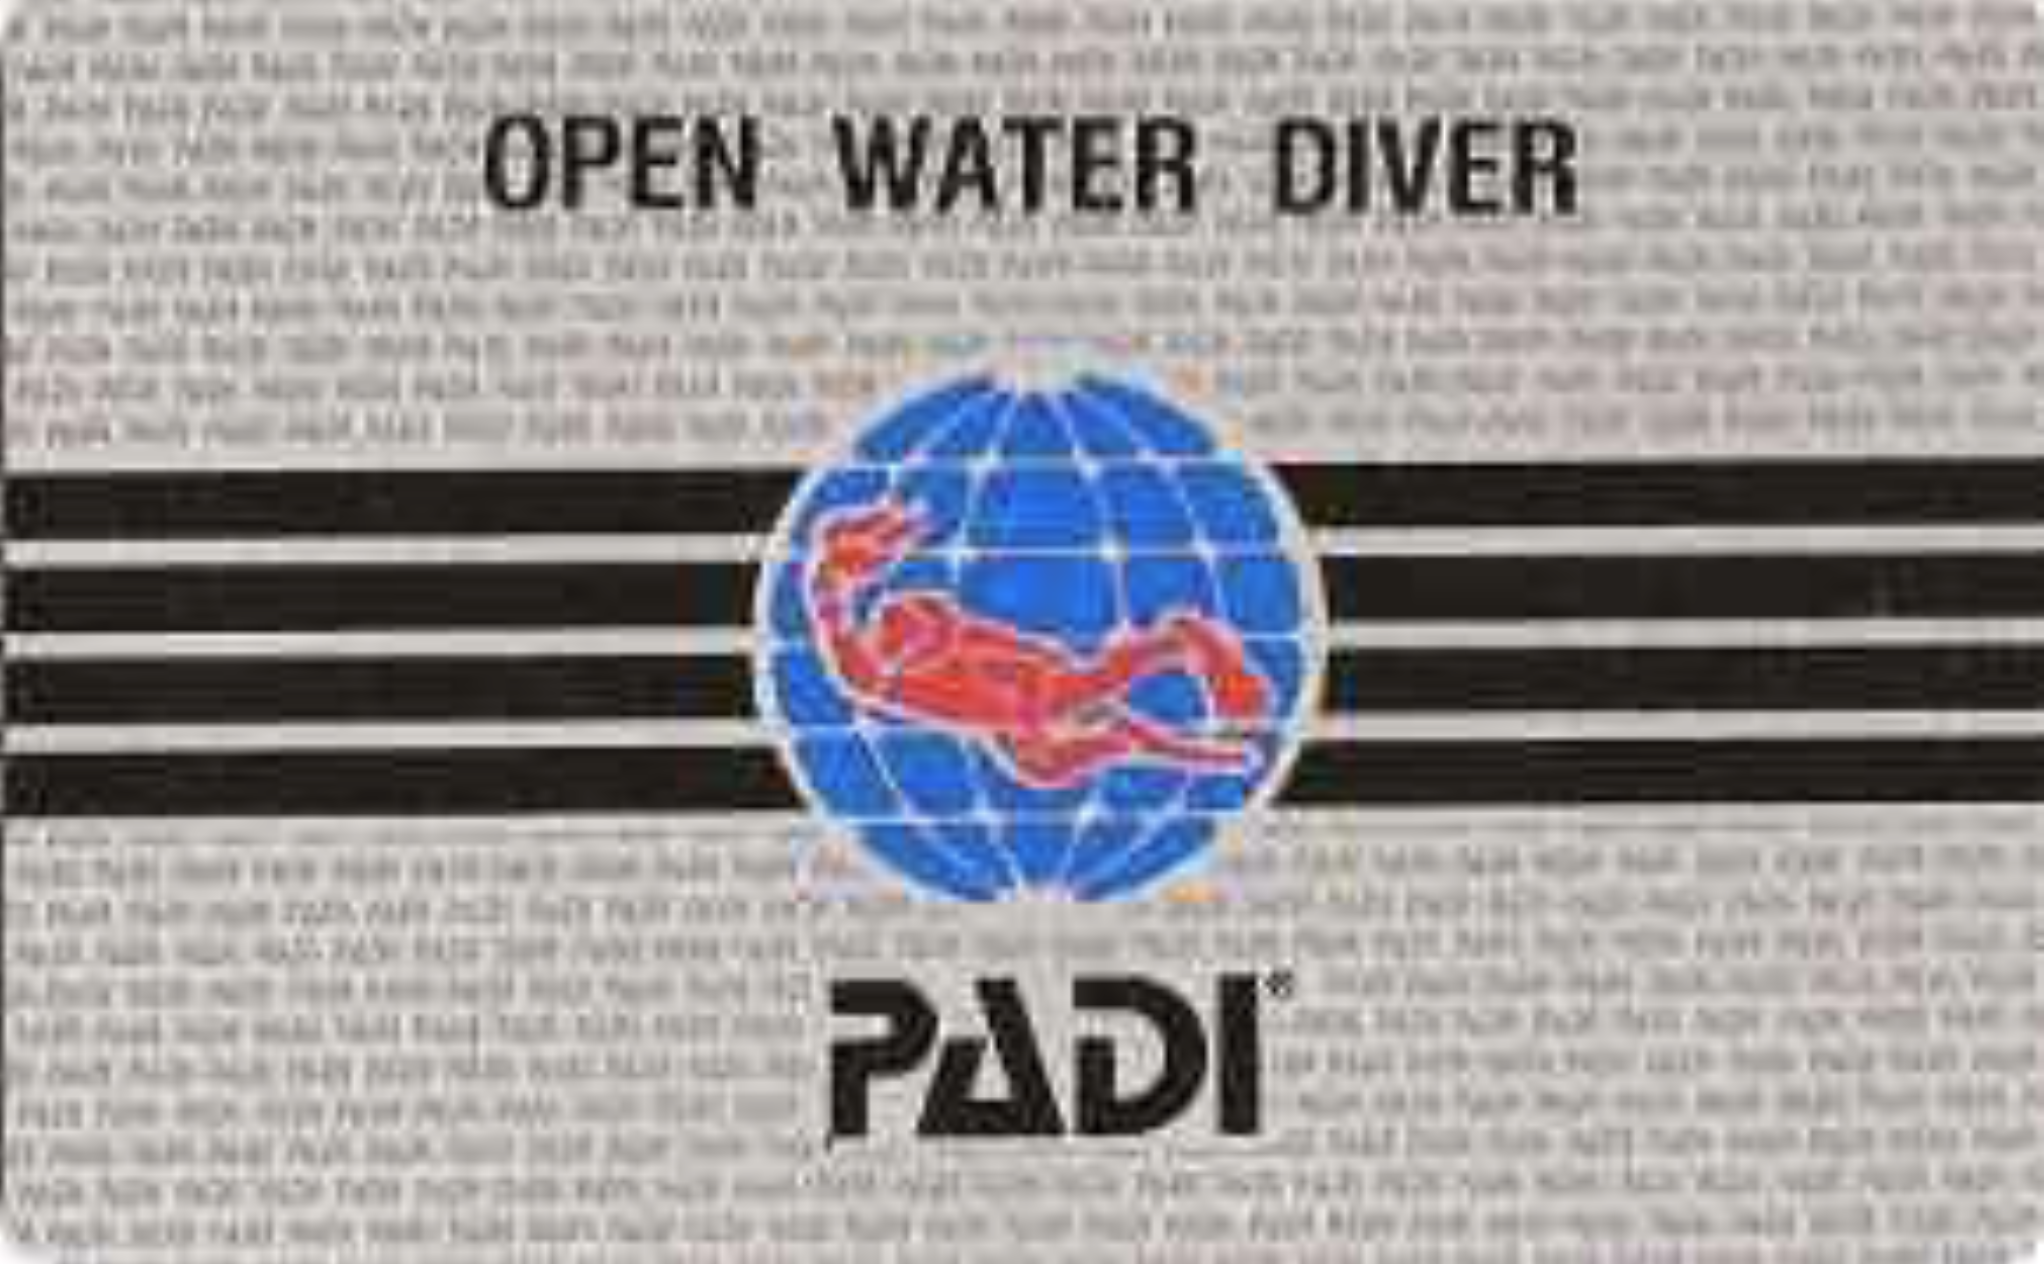 image of PADI's first diver certification card